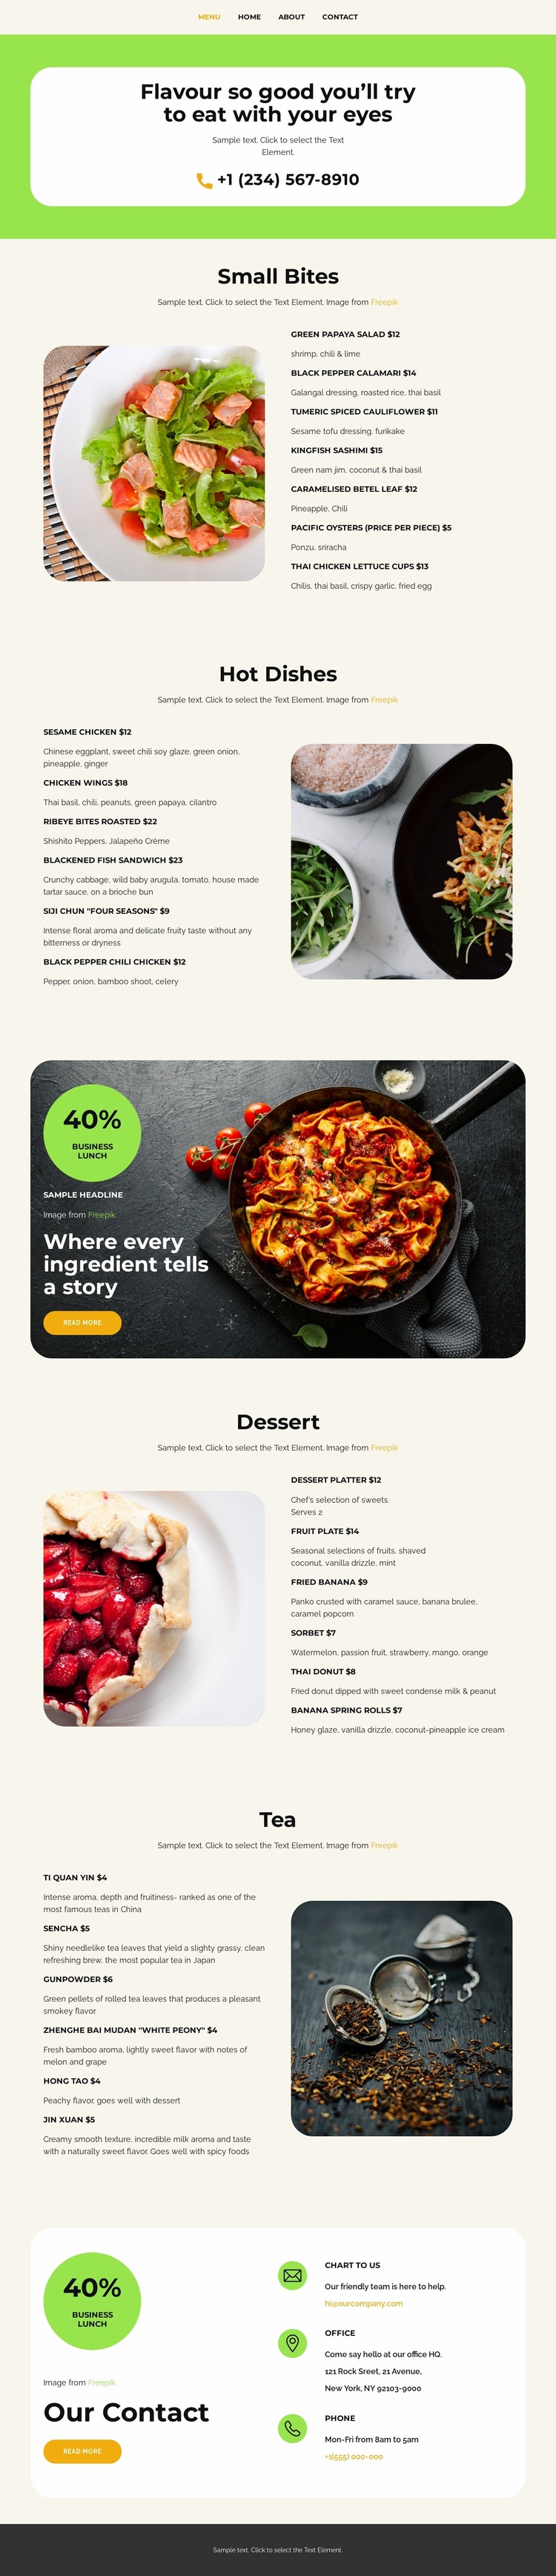 Our Menus eCommerce Template